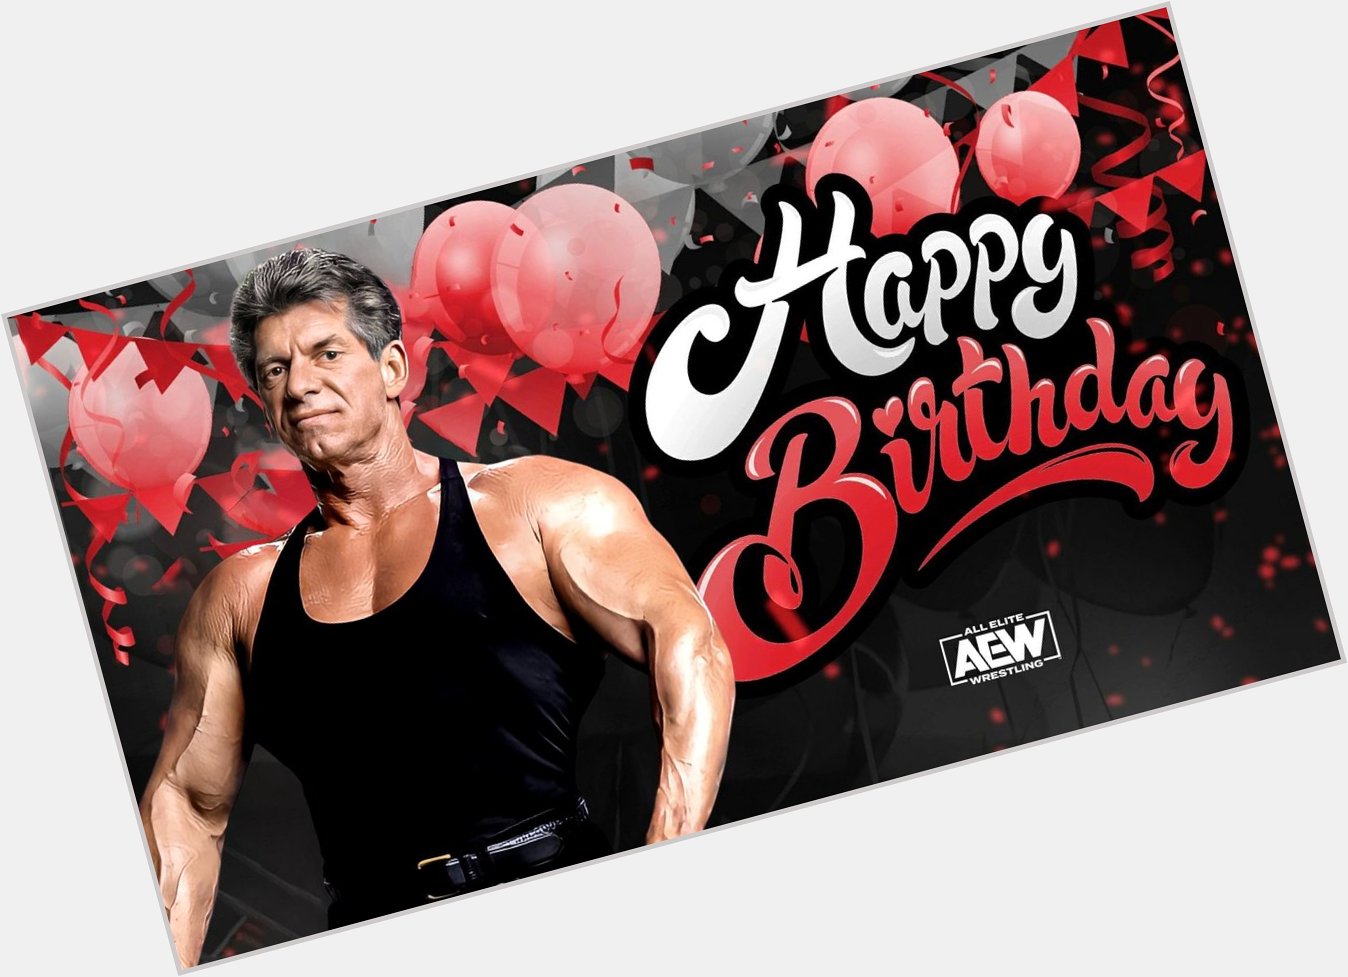 Happy birthday to a true innovator of pro wrestling and paying for sex, WWE\s Vince McMahon! 